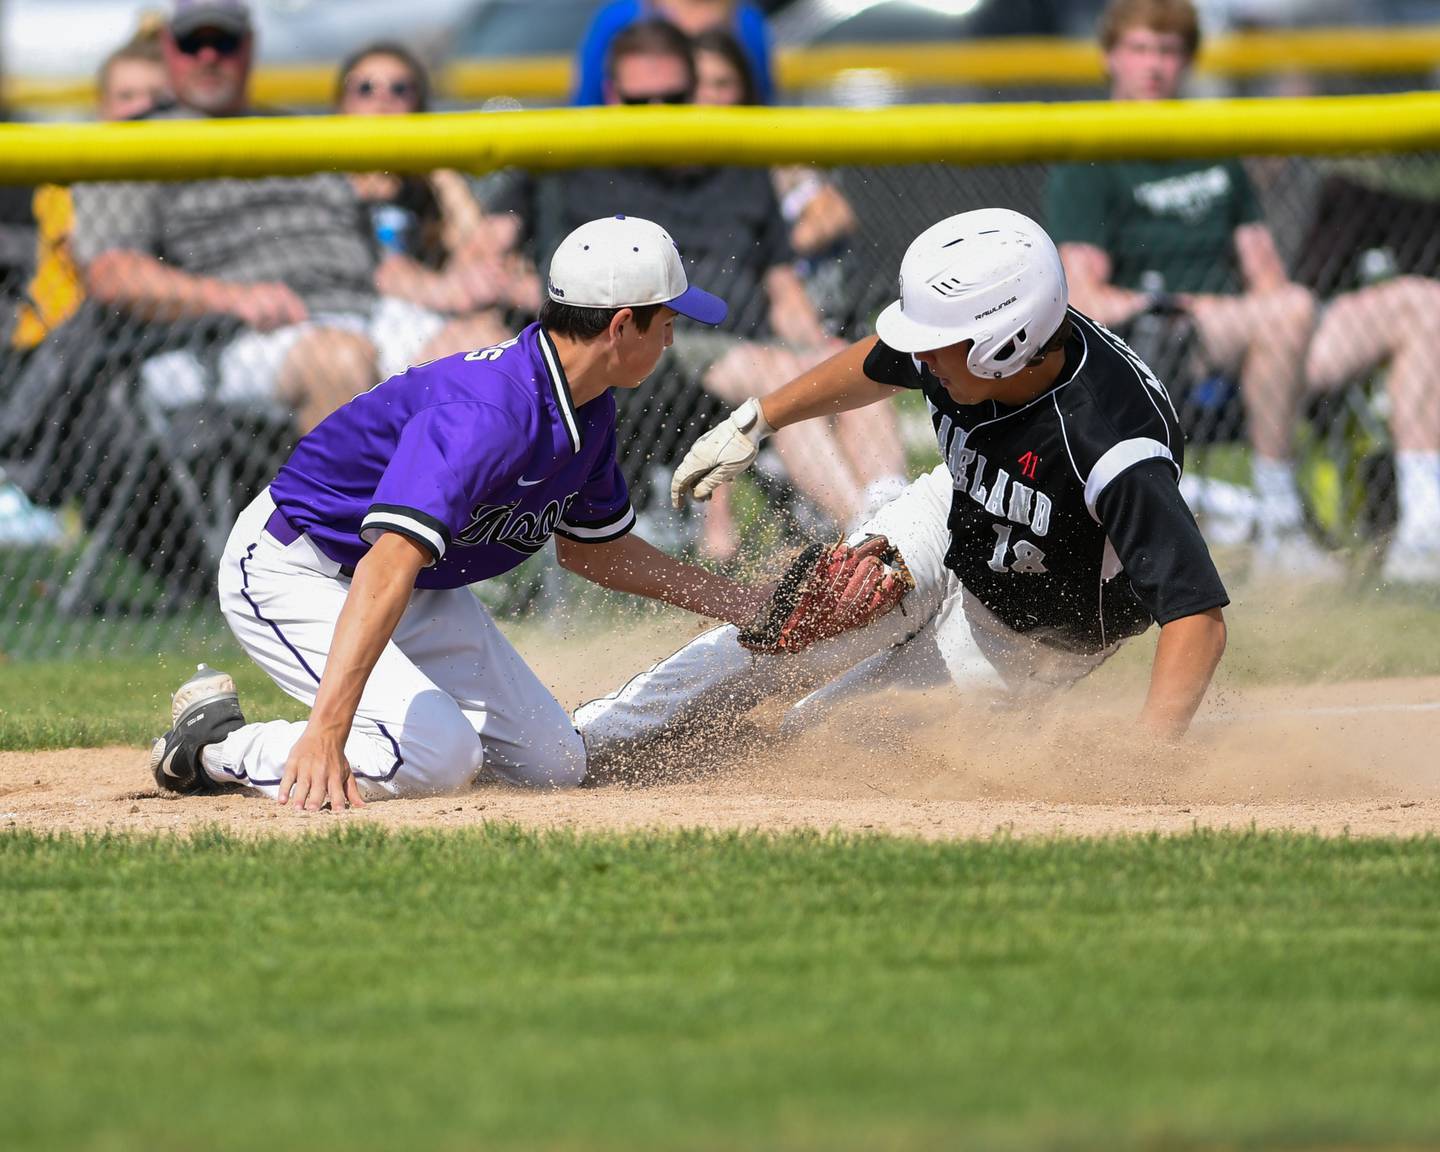 Dixon's Alex Harrison tries to take out Kaneland Collin Miller (18)  as he stole third during the early innings of the game and was called safe on Wednesday, June 1st, held in Sycamore for a sectional playoff game.